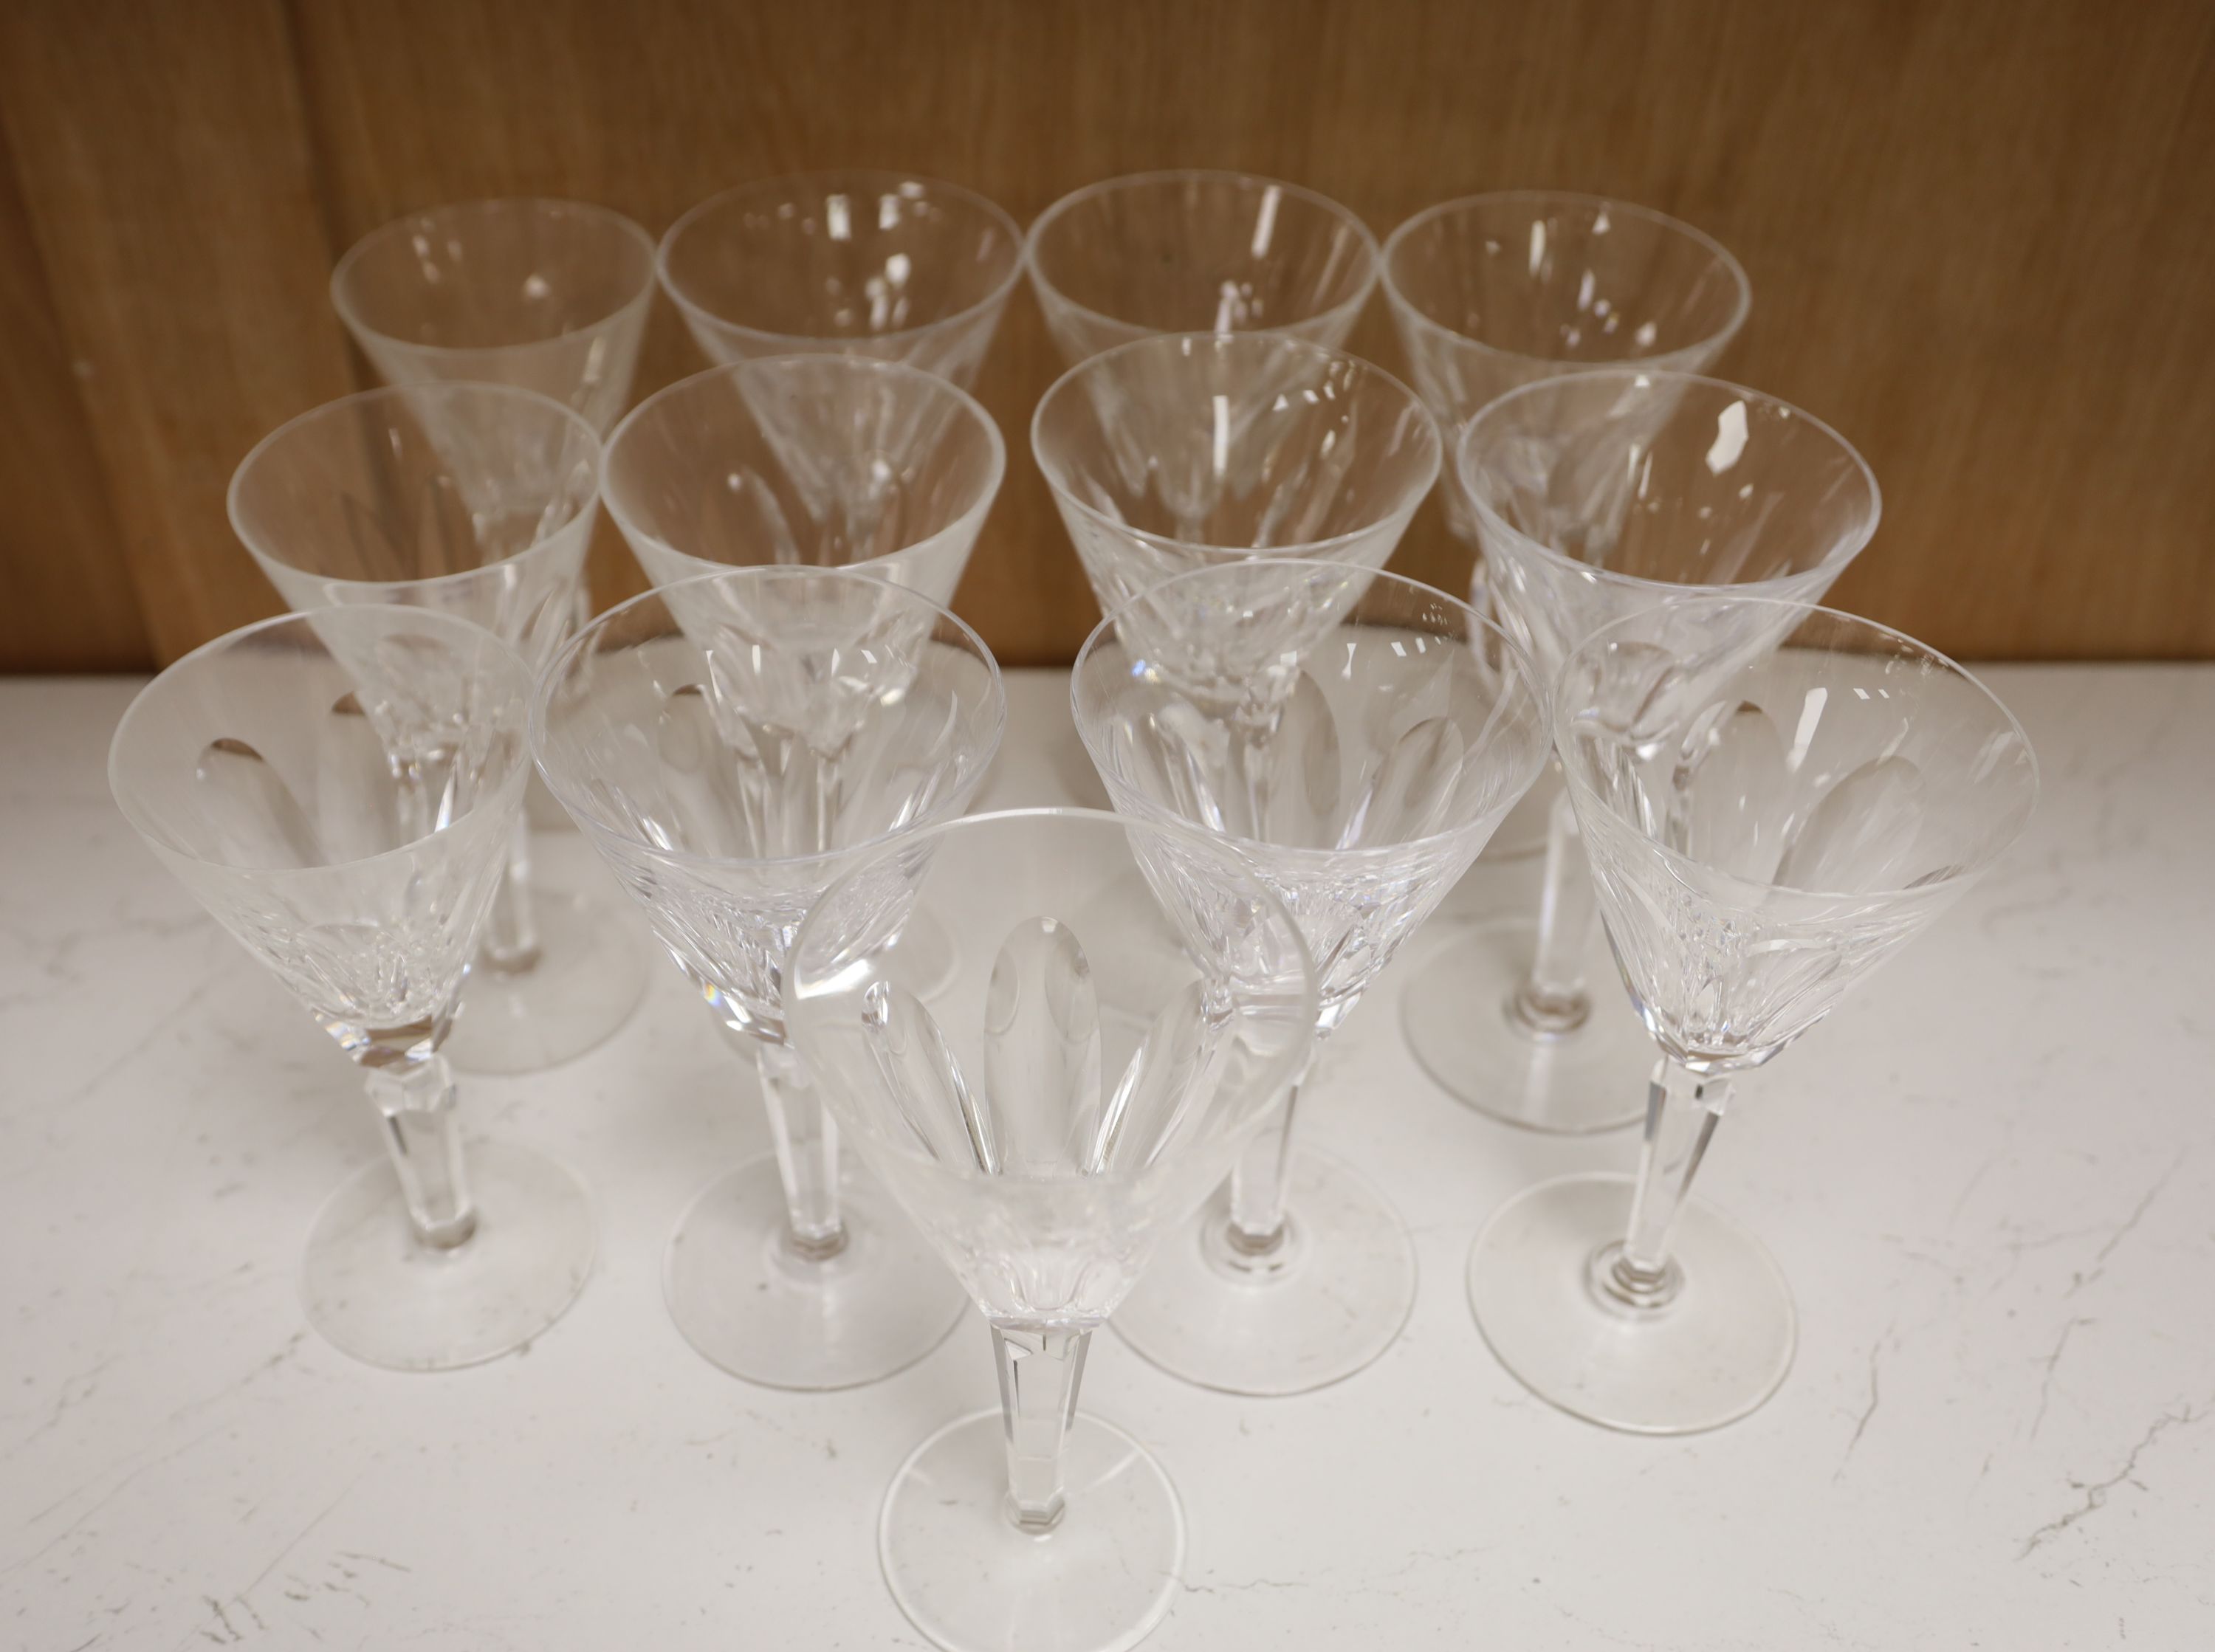 Waterford crystal drinking glasses (13)CONDITION: Three glasses marginally shorter (approx. 8mm) - Image 3 of 5